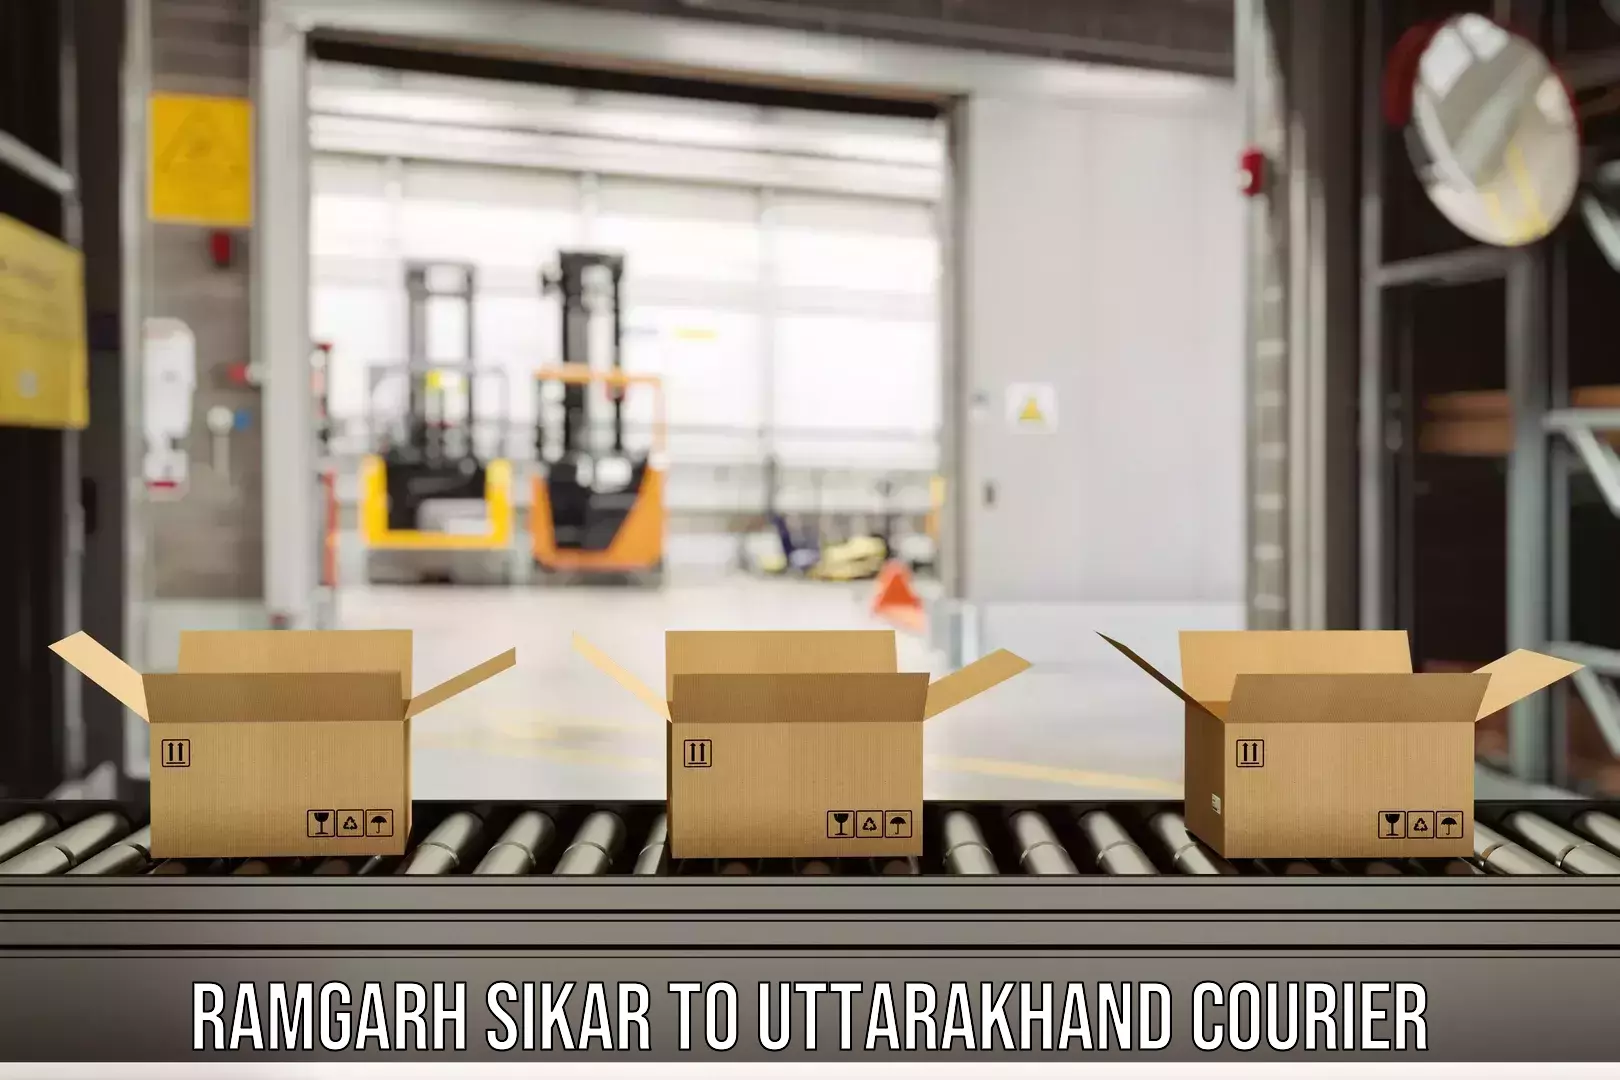 Ocean freight courier Ramgarh Sikar to Pithoragarh